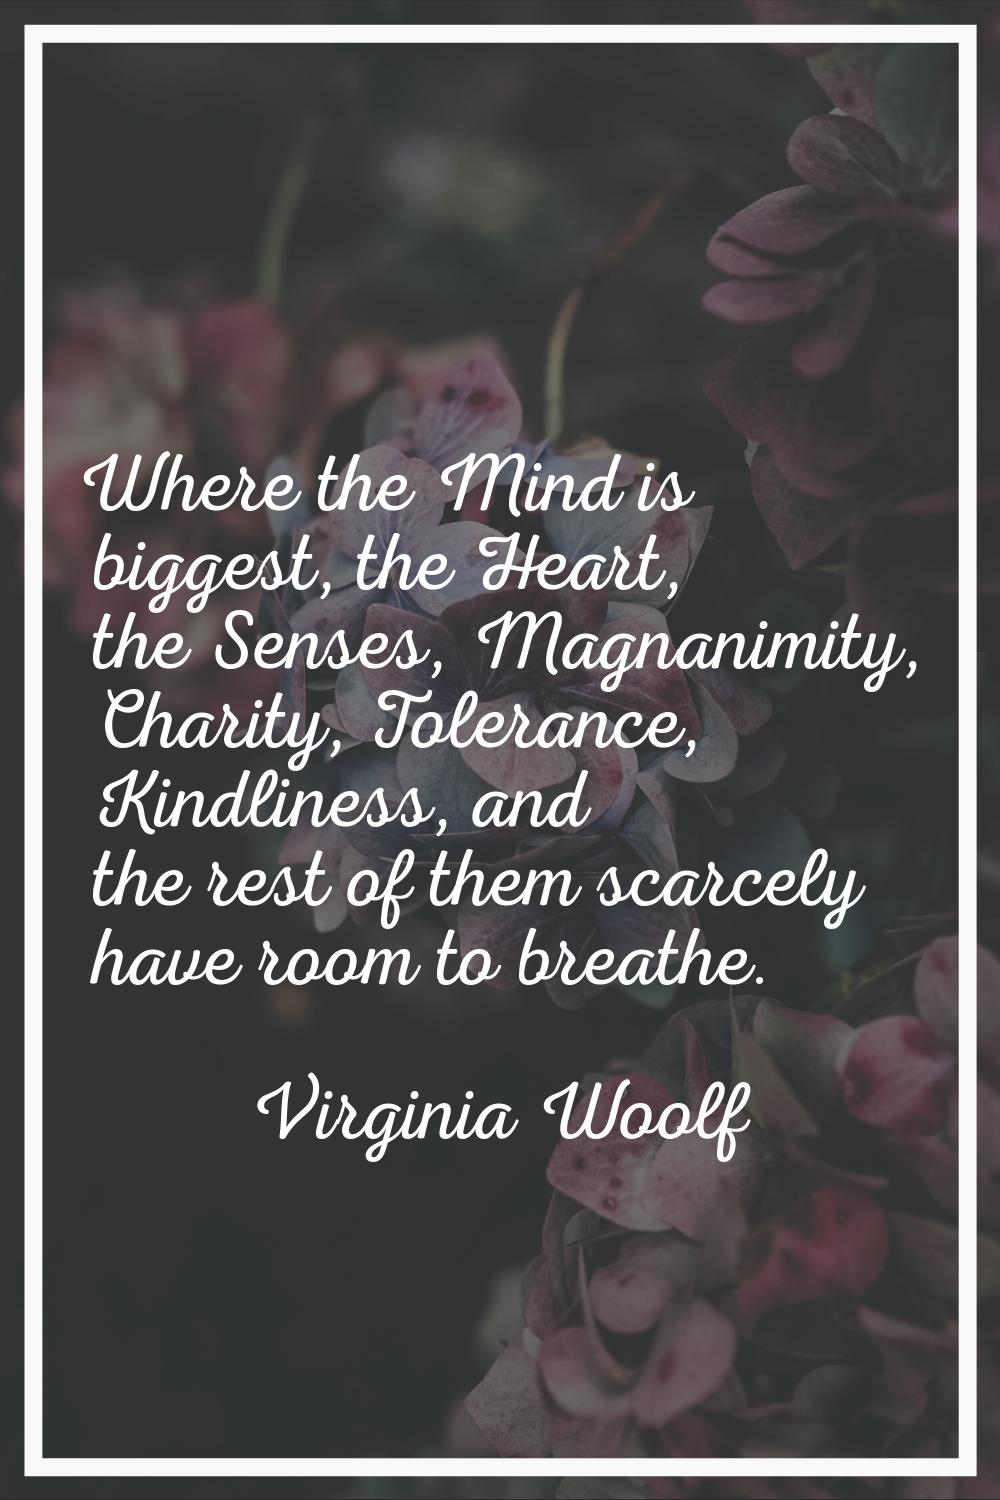 Where the Mind is biggest, the Heart, the Senses, Magnanimity, Charity, Tolerance, Kindliness, and 